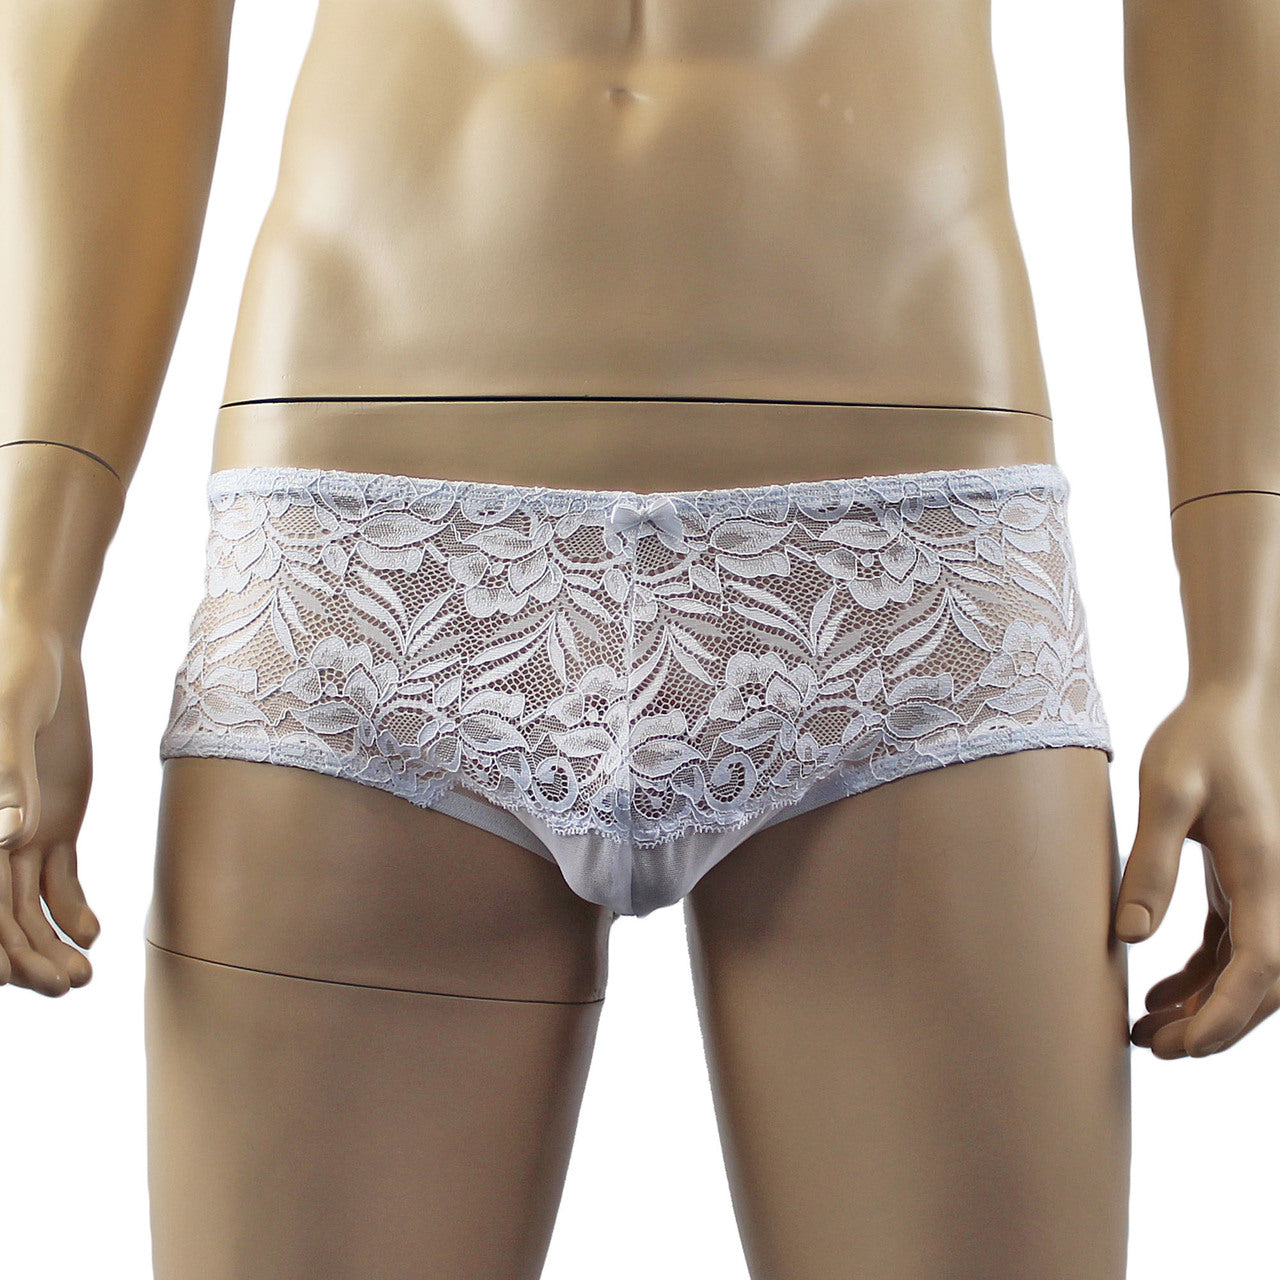 Mens Kristy Lingerie Sexy Lace and Mesh Panty Brief White